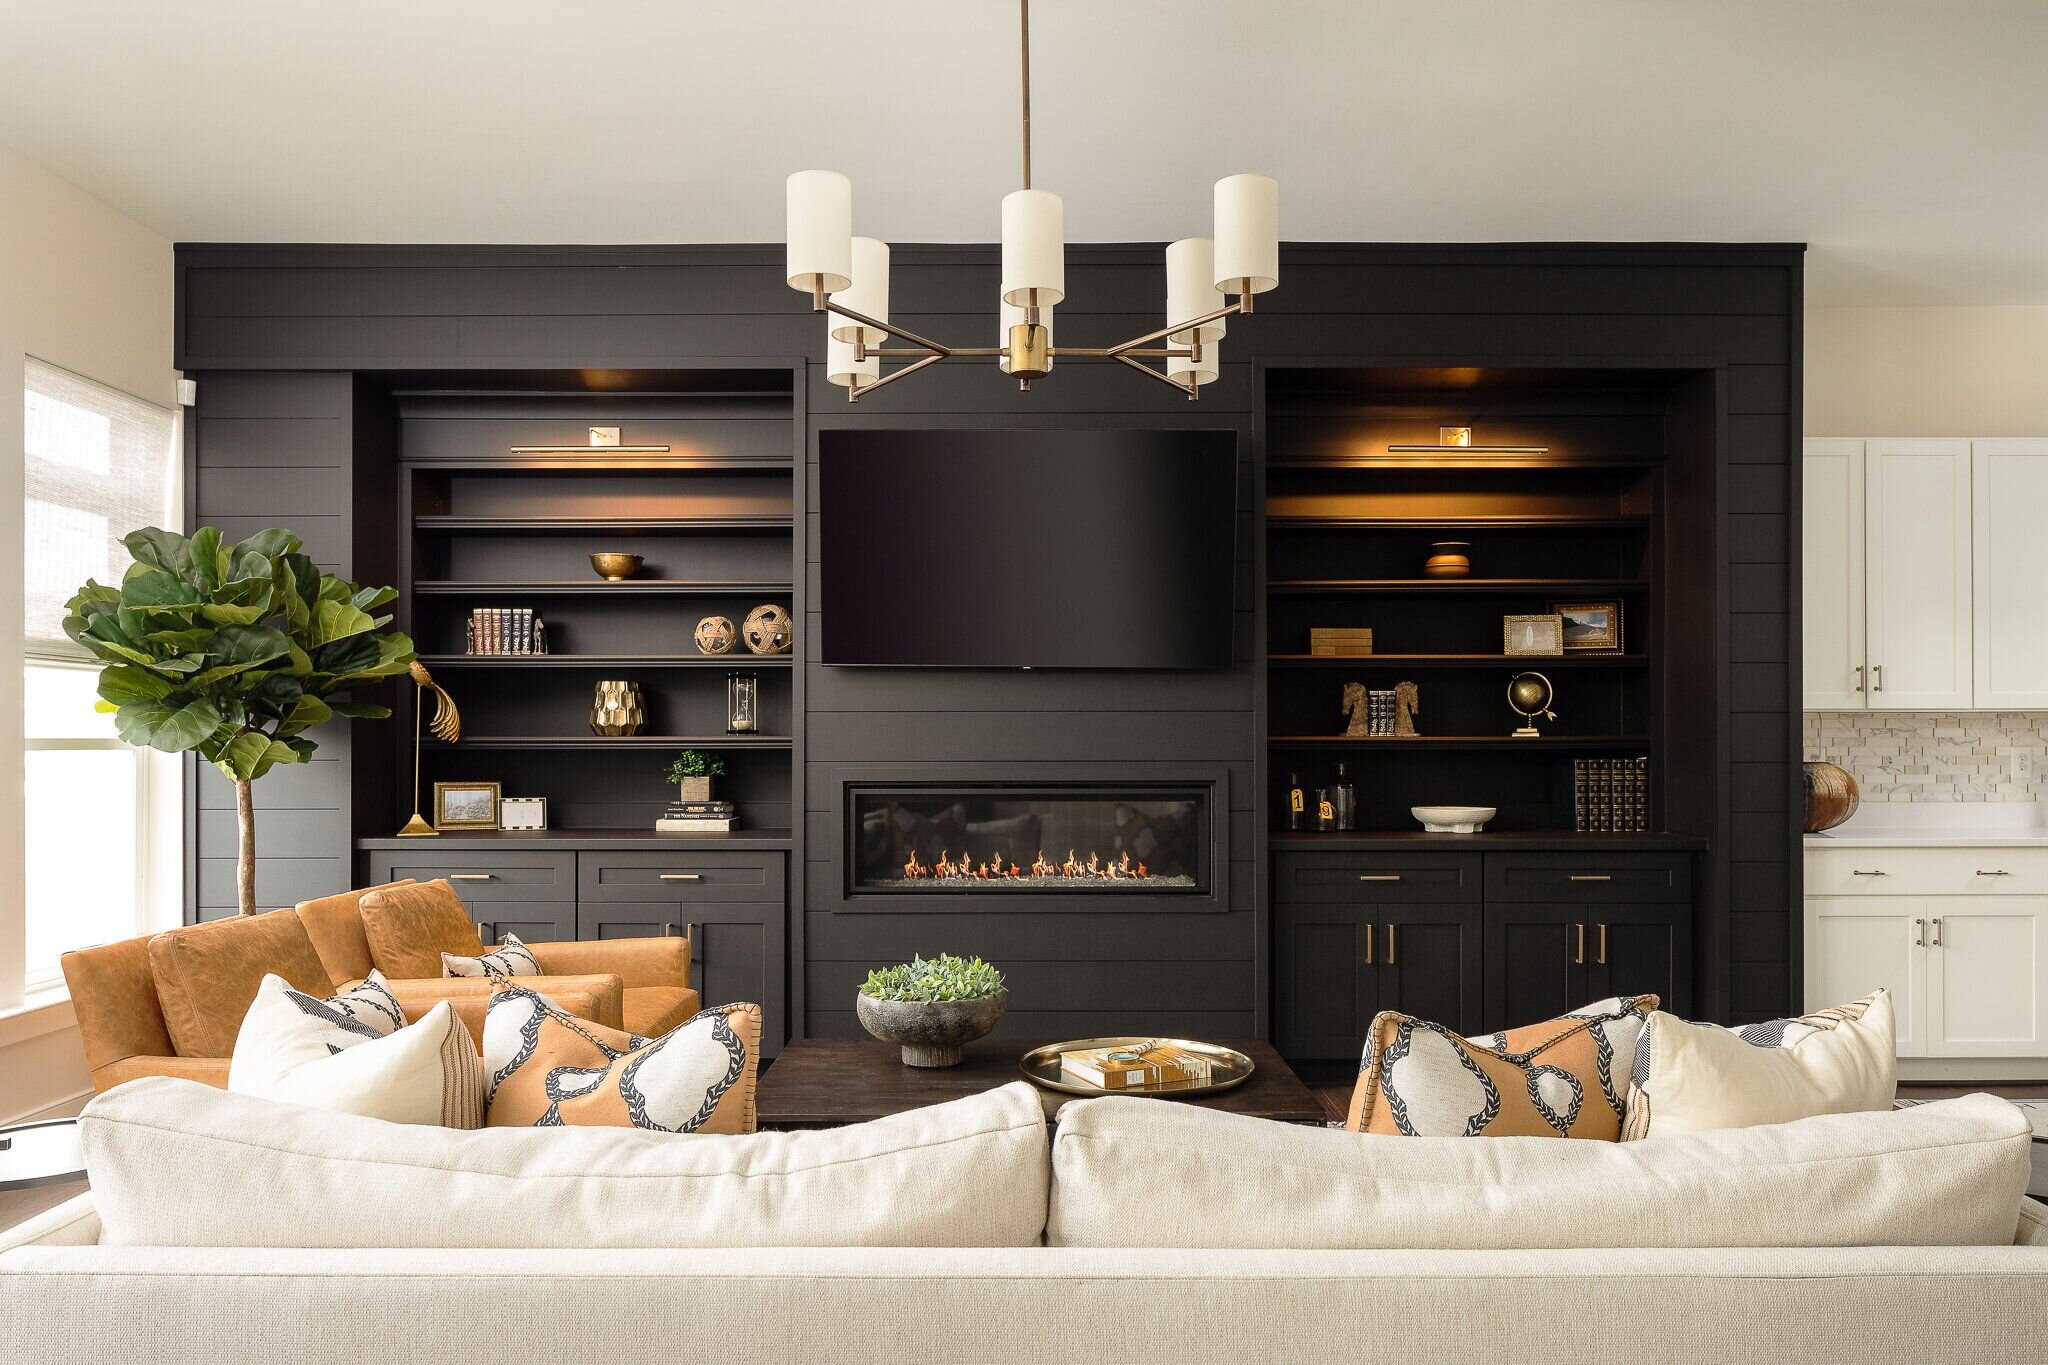 Luxury Lives Here. At Sweeps N Ladders, we create fireplaces that make a statement💫. Experience the perfect blend of comfort, warmth, and sophistication. #StatementFireplaces💥

📷: Pinterest

#sweepsnladders #fireplacerenovation #chimneysweeper  #f